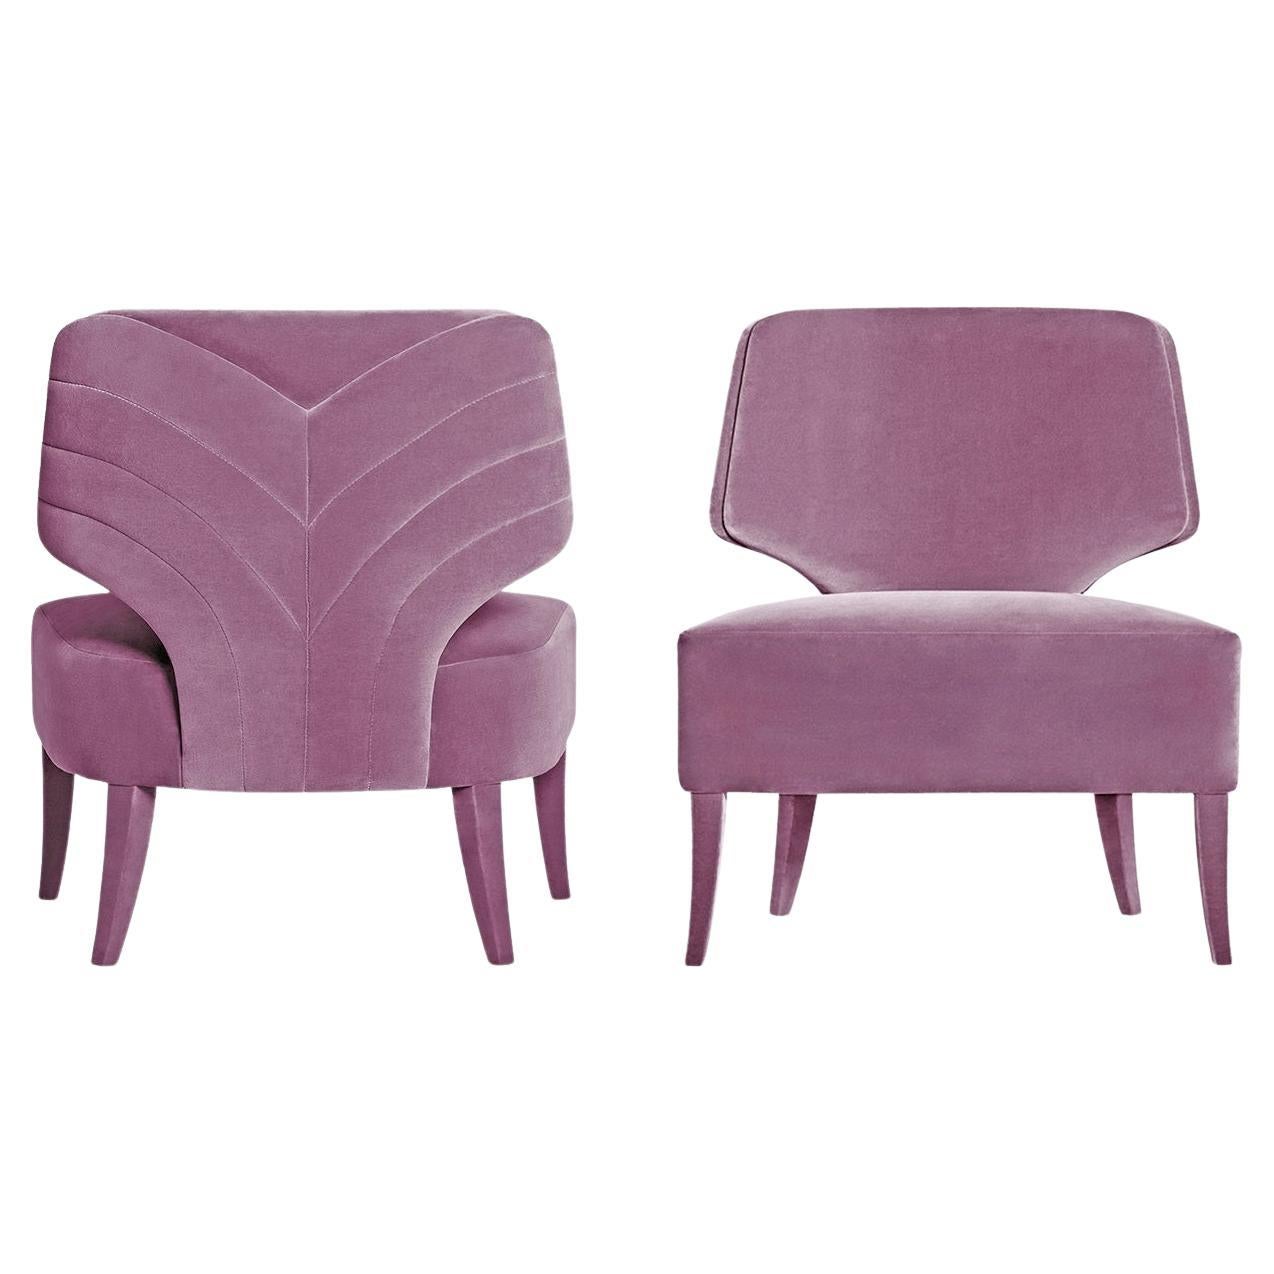 Contemporary Armchair Offered in Velvet with Back Curved Lines